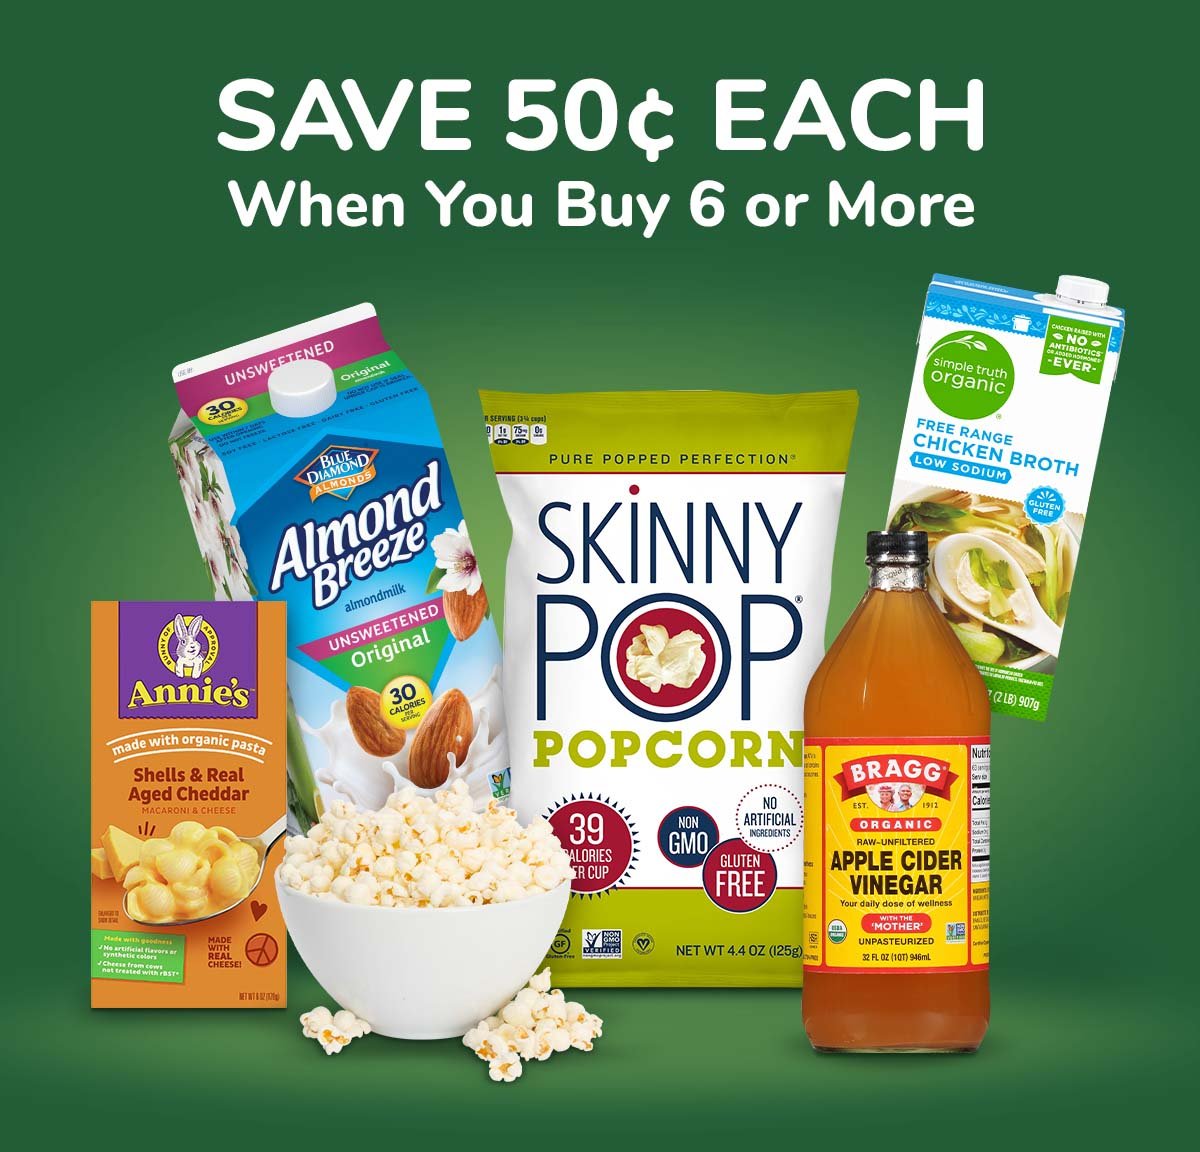 Save 50¢ Each When You Buy 6 or More